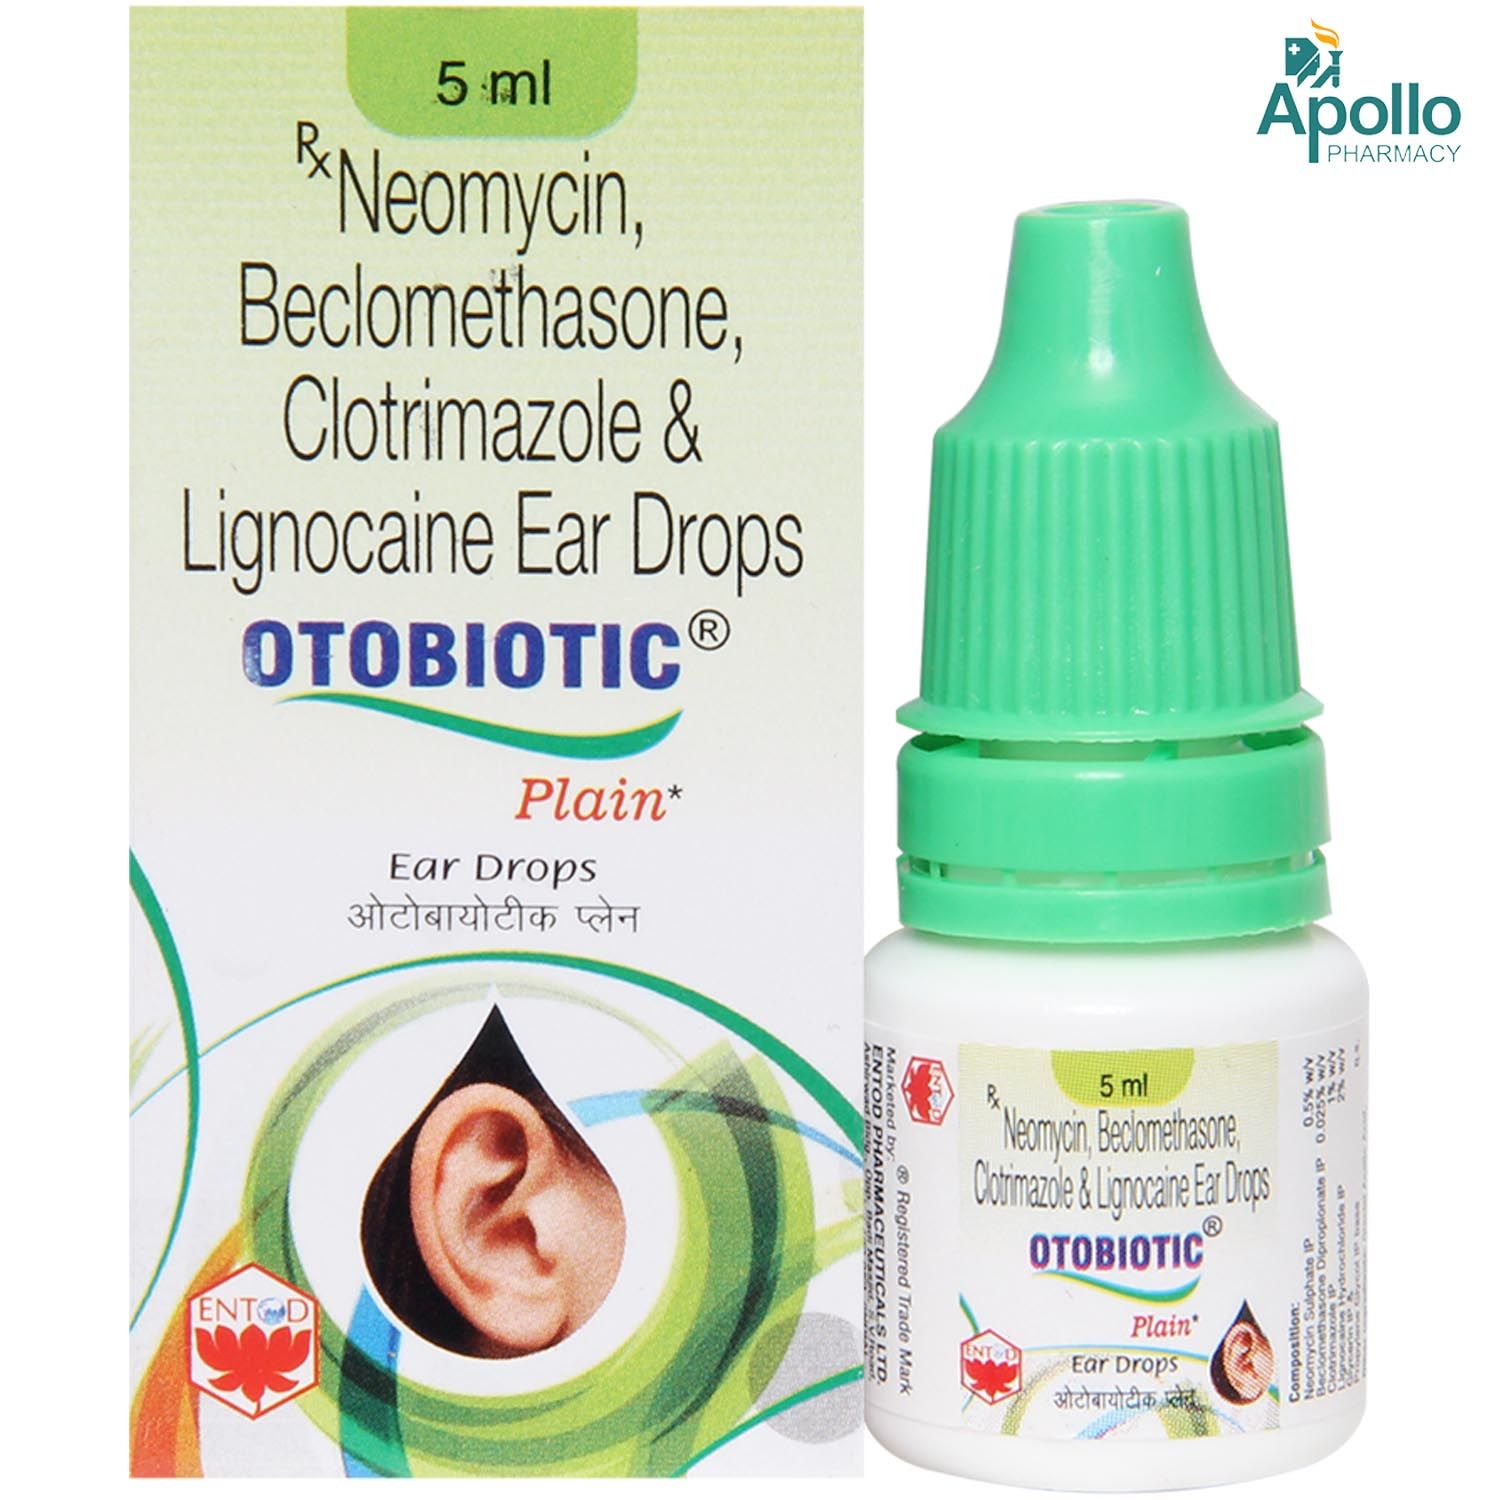 OTOBIOTIC DROPS 5ML Price, Uses, Side Effects, Composition - Apollo